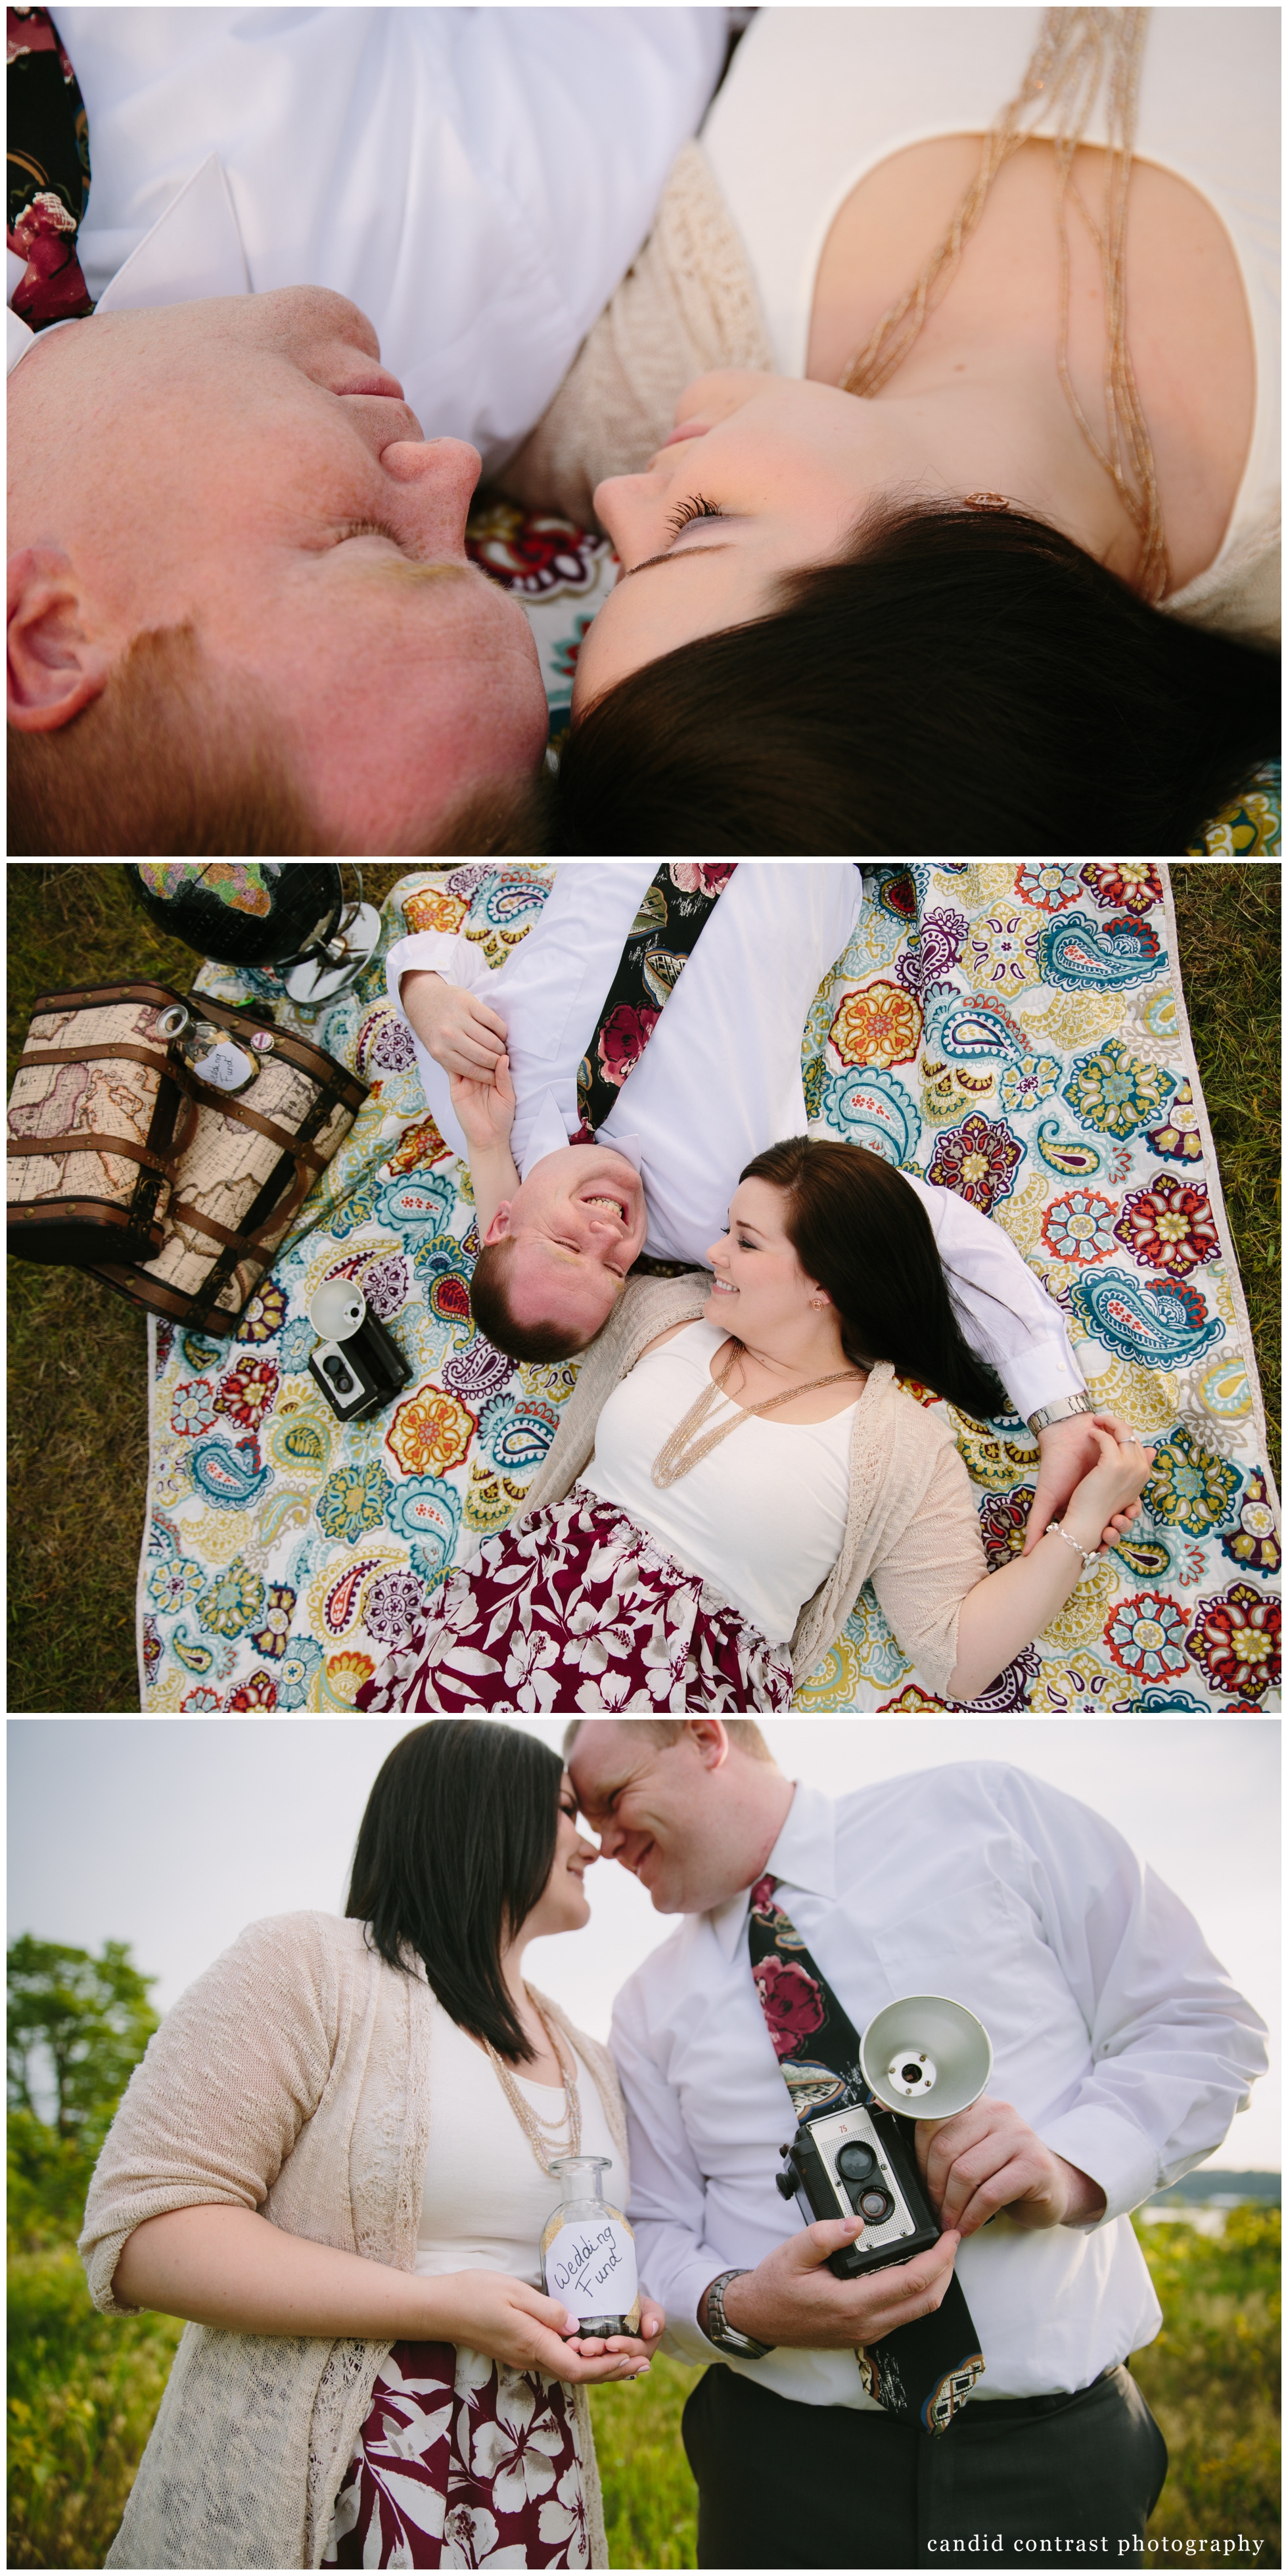 Disney UP themed engagement session in Dubuque, Iowa, Iowa wedding photographer Candid Contrast Photography